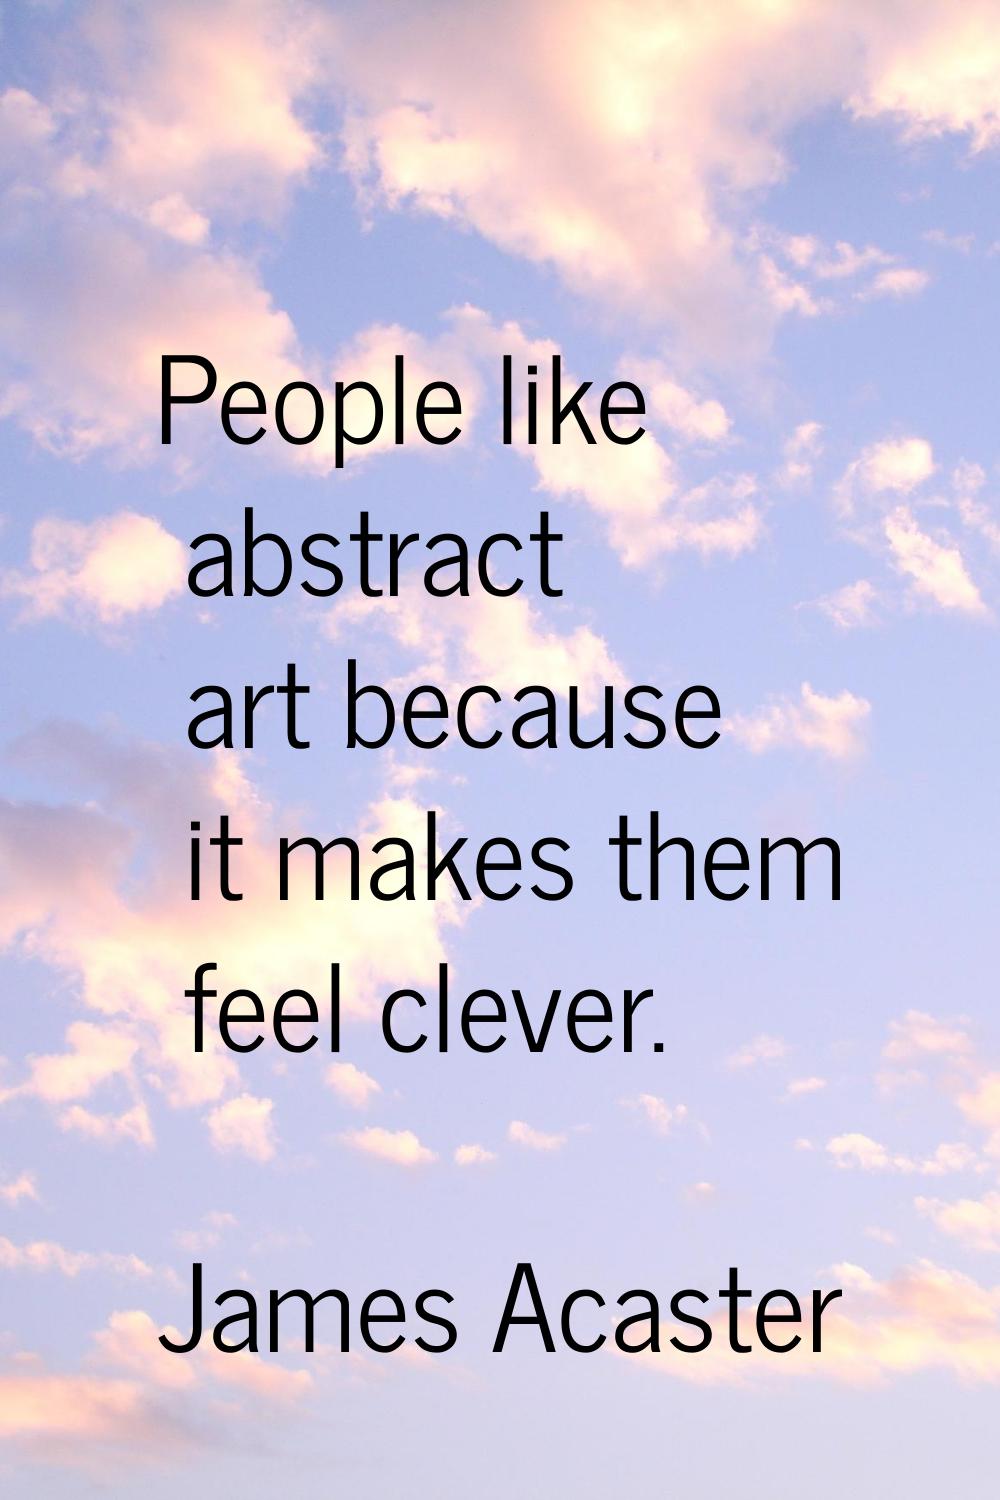 People like abstract art because it makes them feel clever.